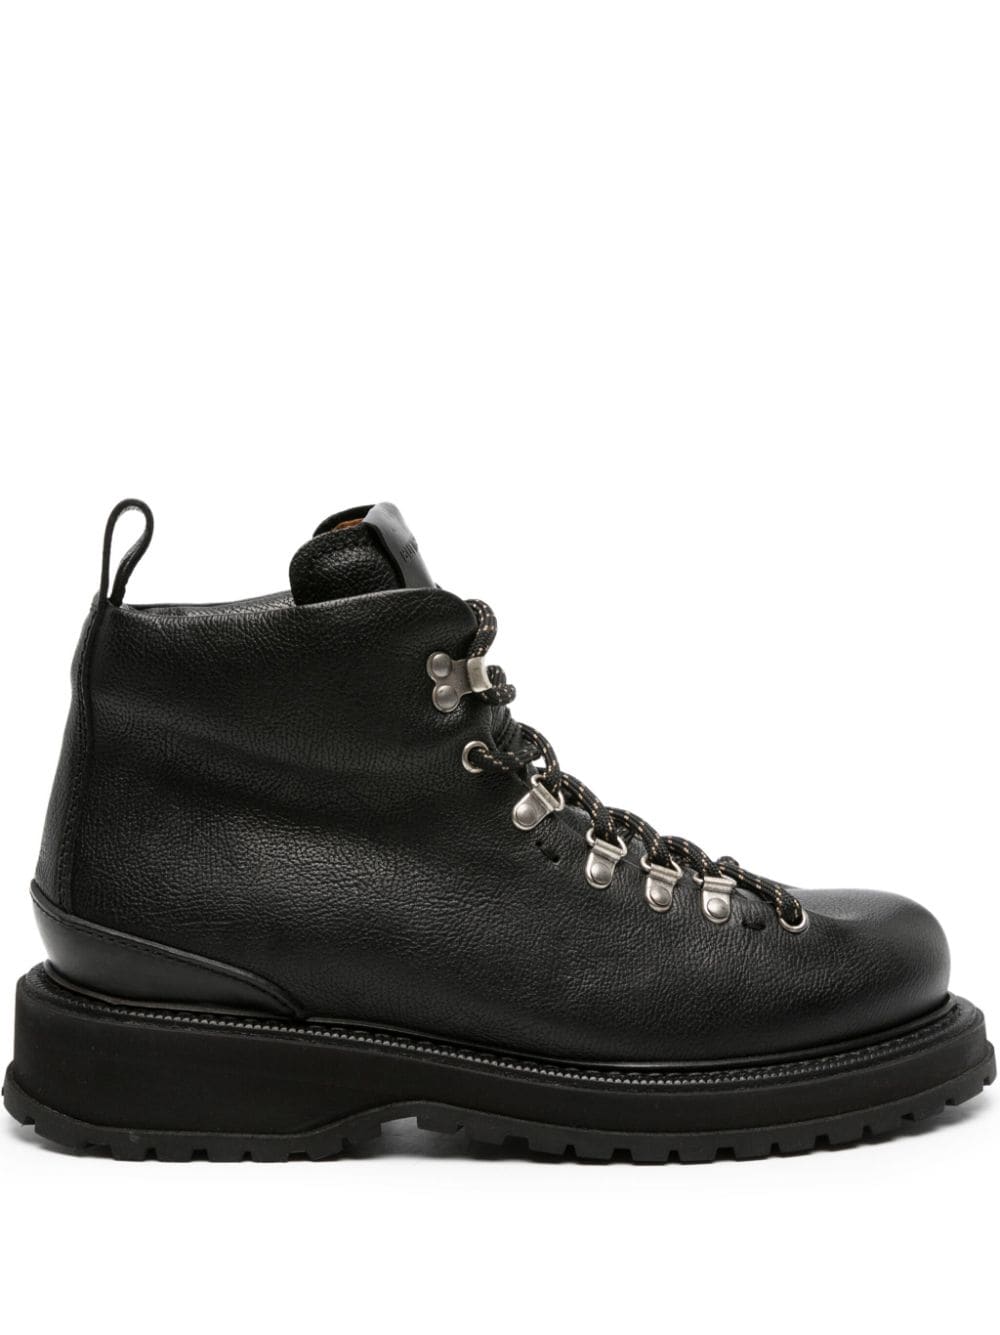 Buttero Alpi Leather Boots In Black